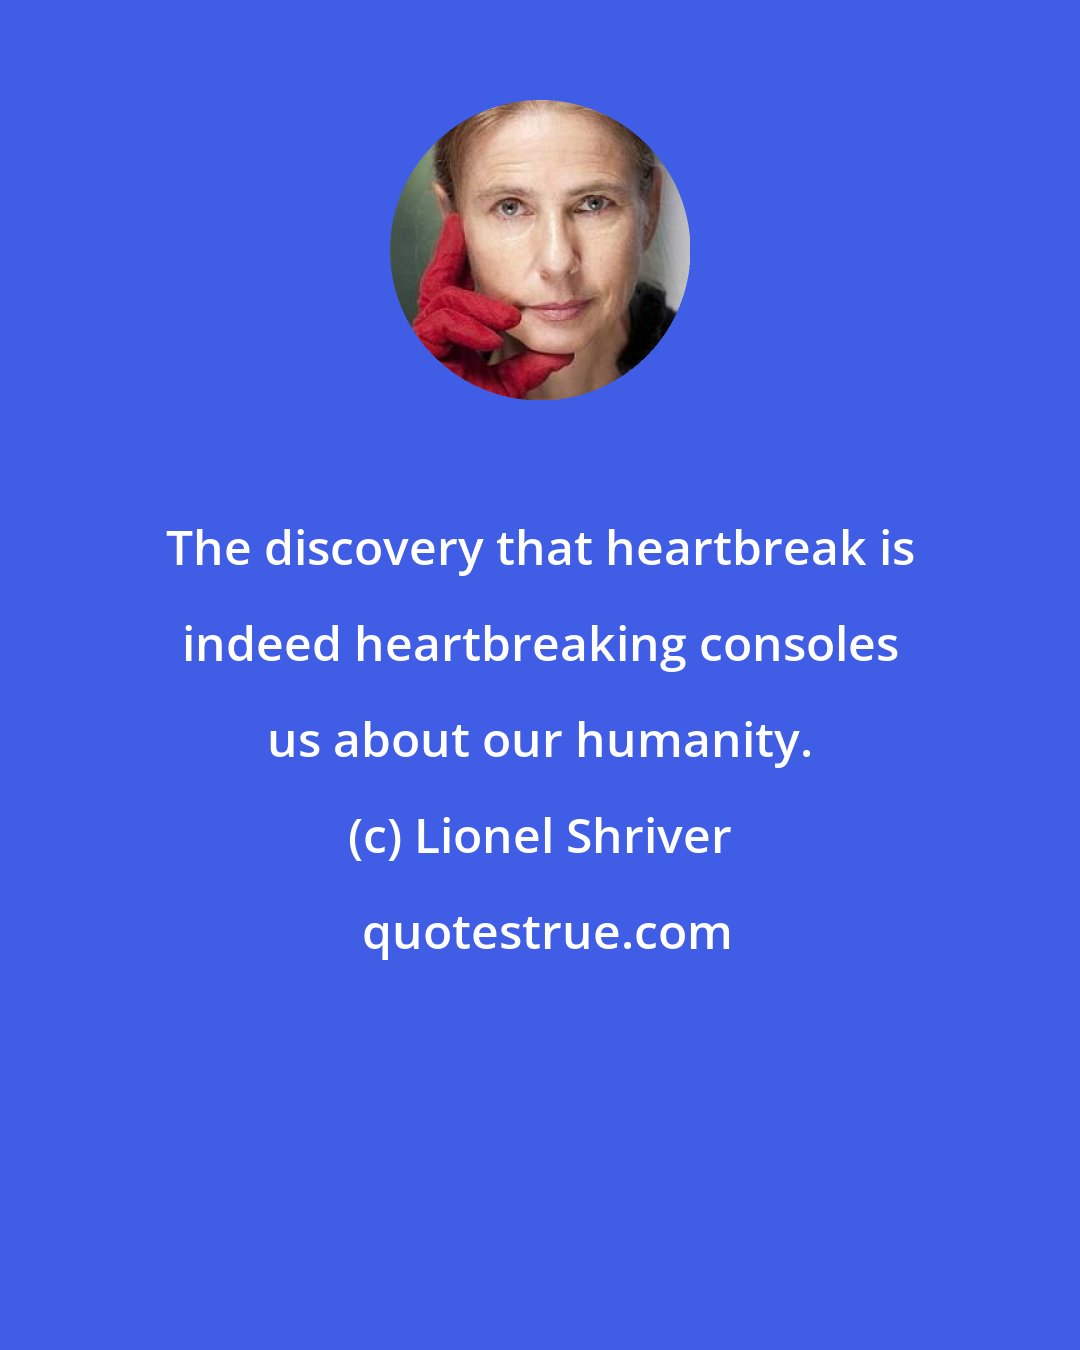 Lionel Shriver: The discovery that heartbreak is indeed heartbreaking consoles us about our humanity.